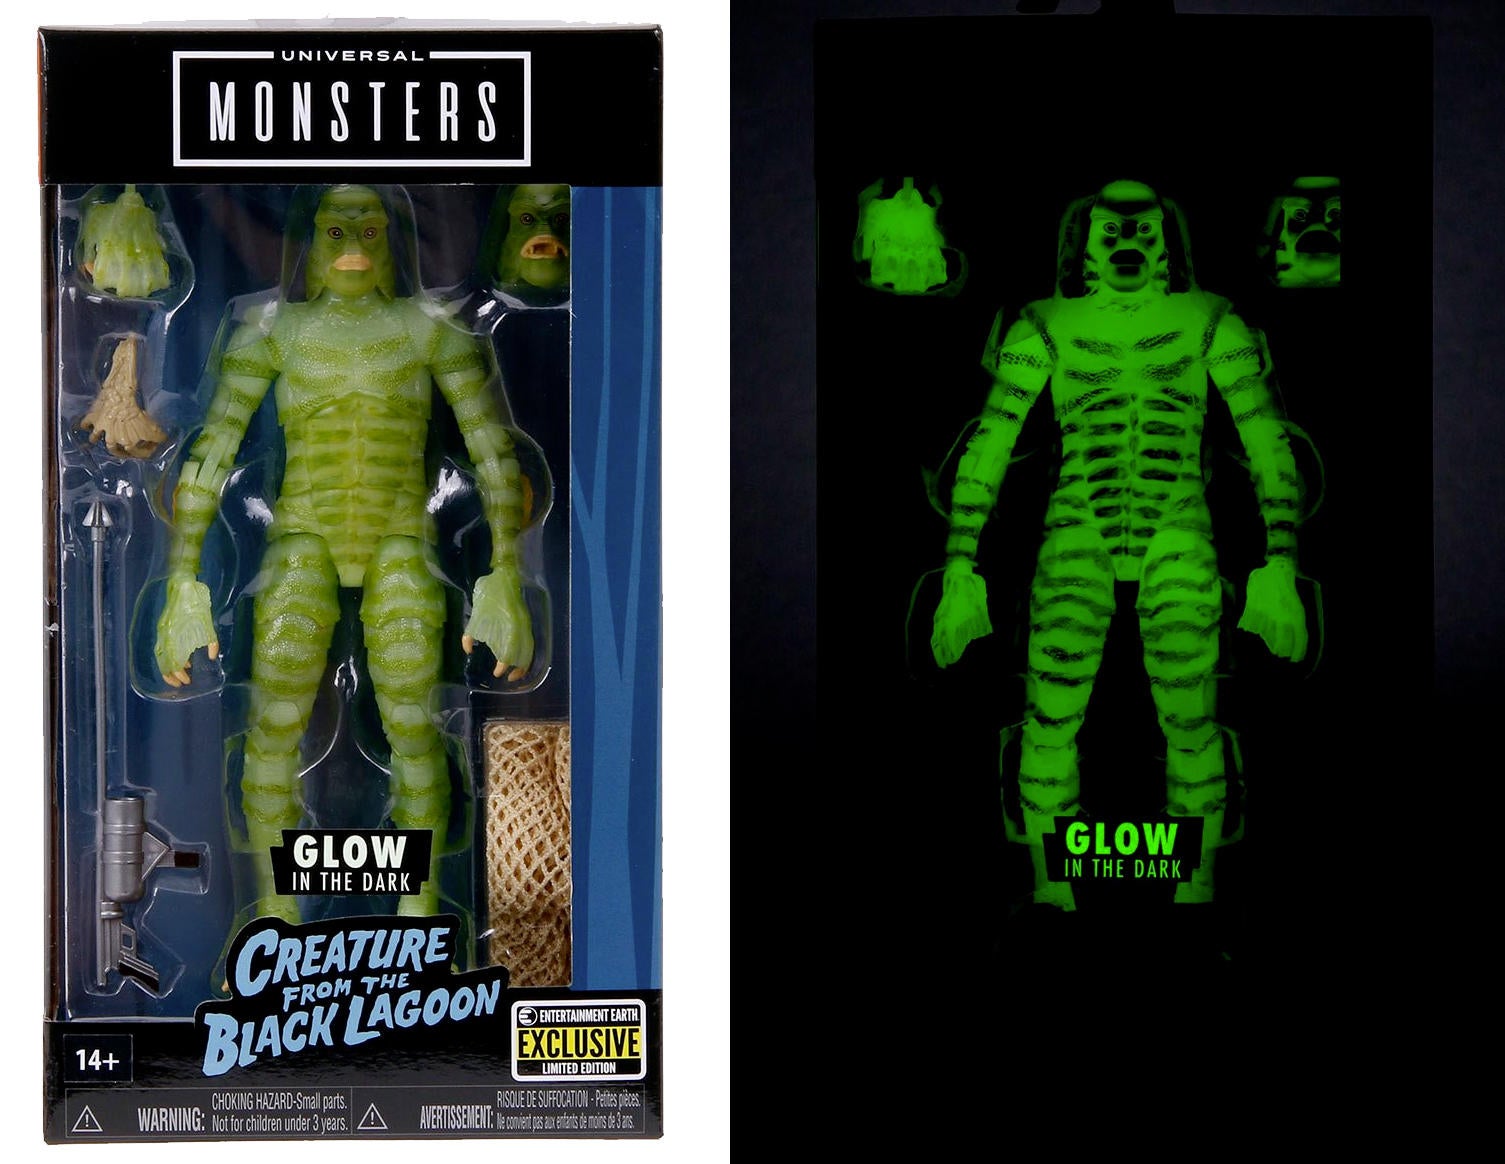 Exclusive Universal Monsters Creature From The Black Lagoon Figure